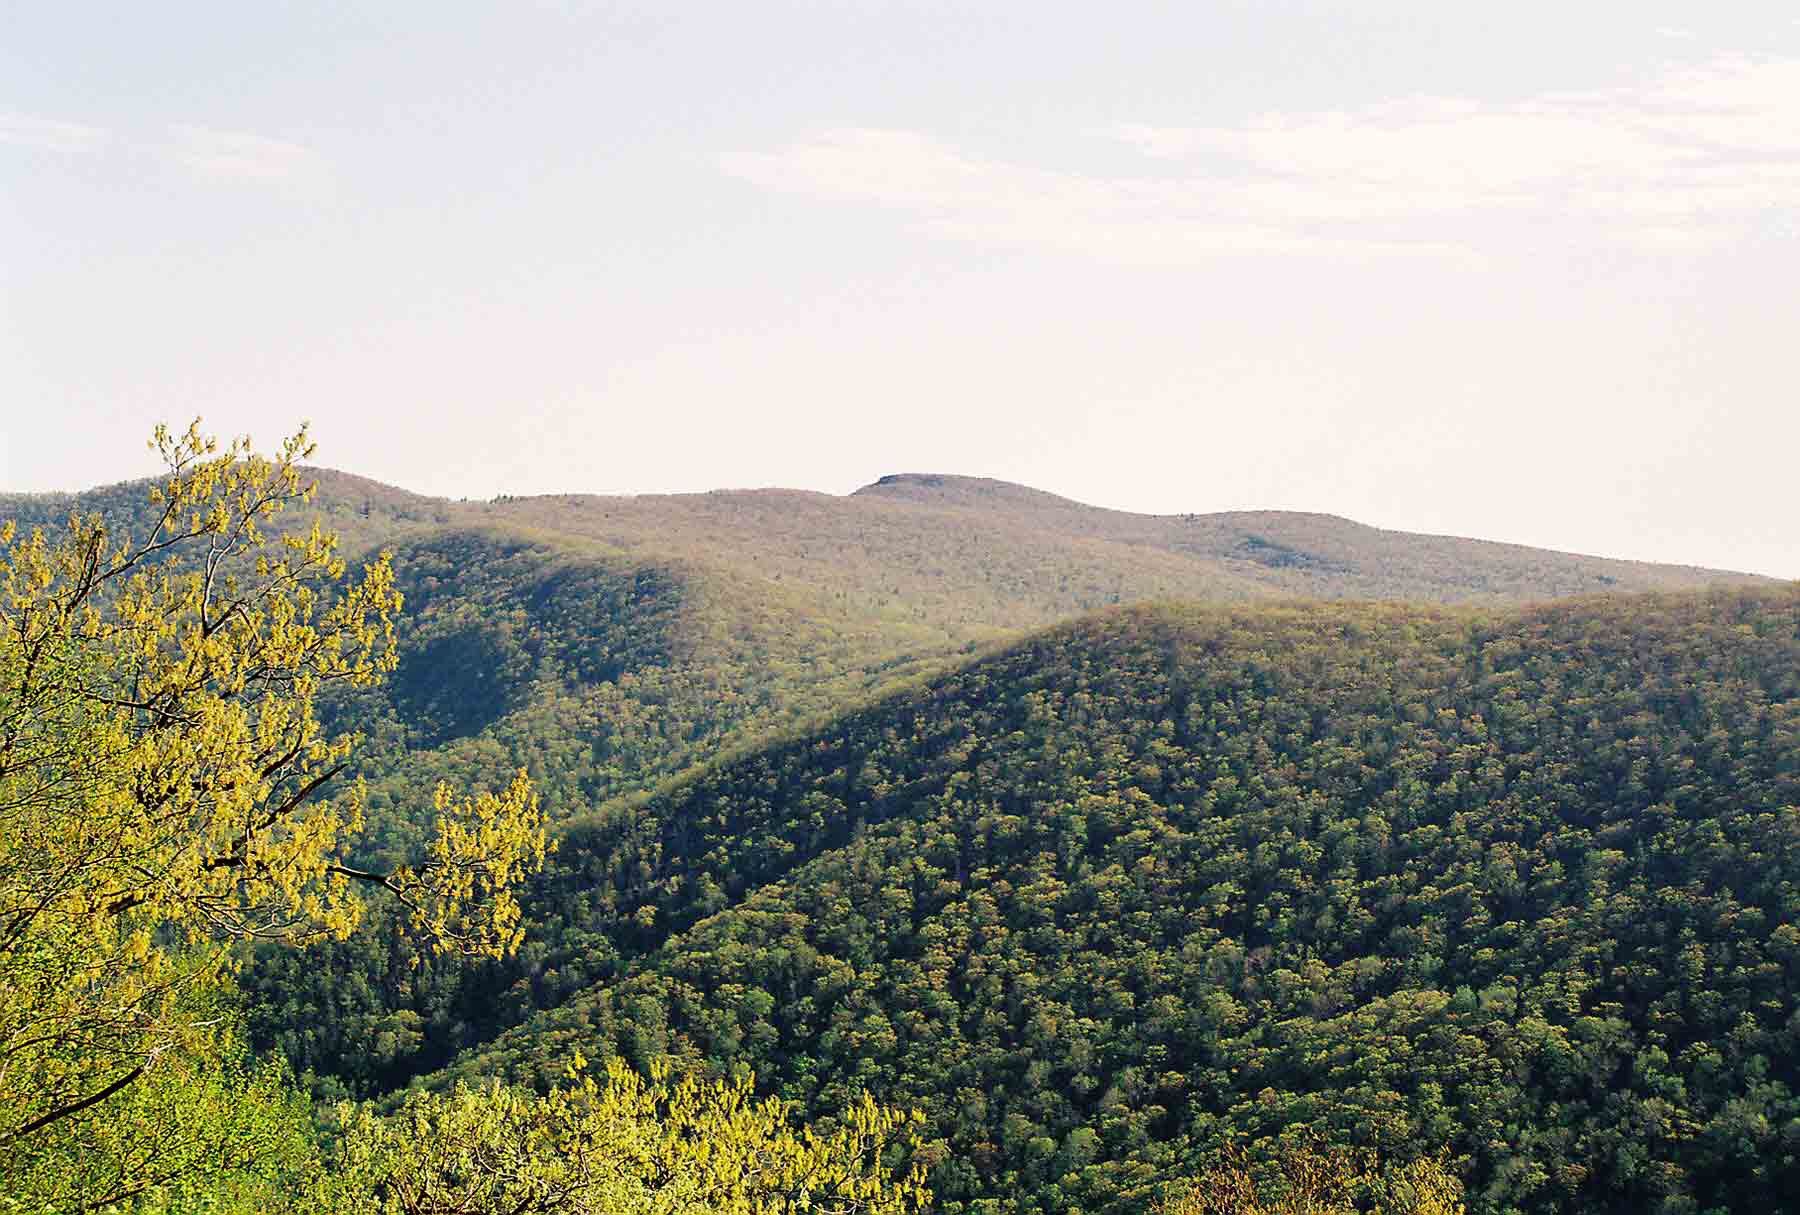 View north towards Stony Man from just north of Hawksbill. This was taken in early May which explains the light green of the vegetation at higher elevtations. Taken at approx. MM 3.5.  Courtesy dlcul@conncoll.edu